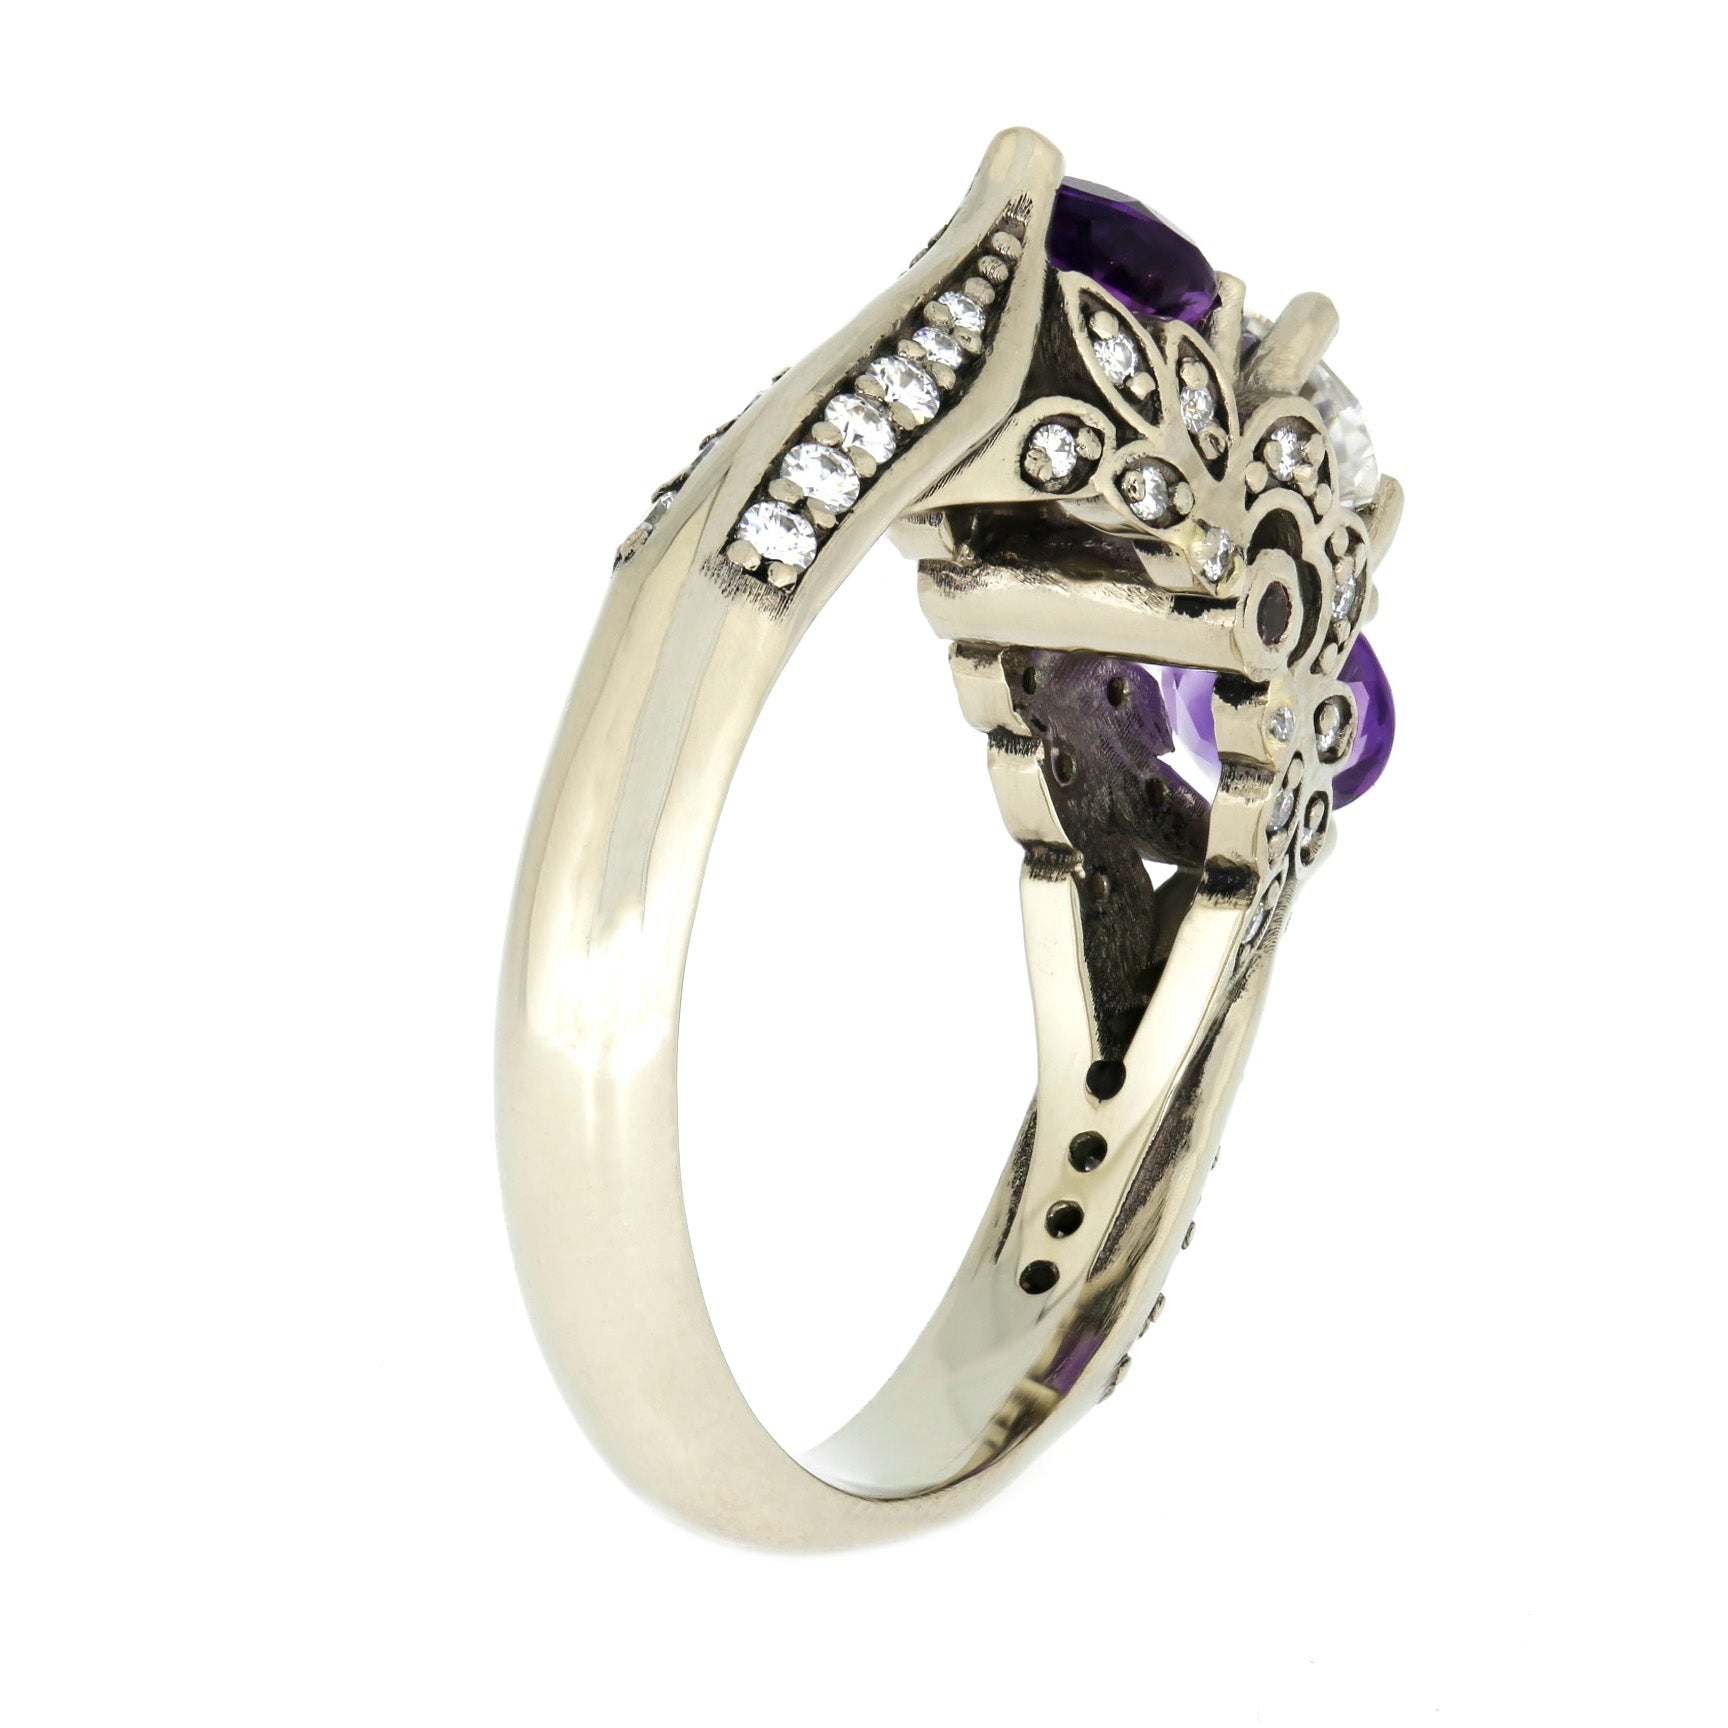 Moissanite and Amethyst Engagement Ring, White Gold Floral Ring-4065 - Jewelry by Johan